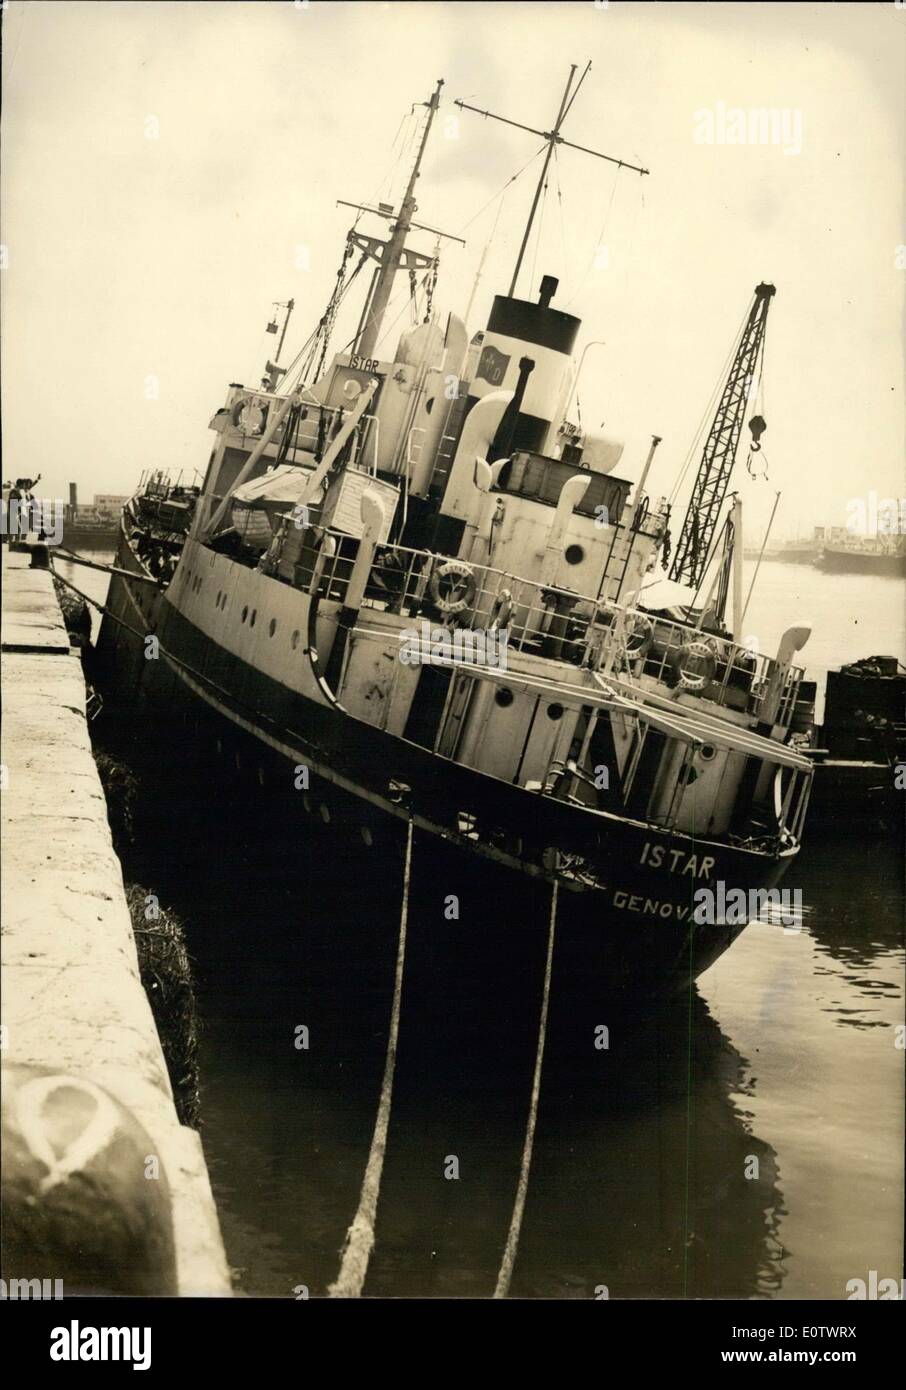 Aug. 13, 1960 - Cargo Ship aground for Three years refloated by two Amateurs:After many months of patient efforts and working 14 hours a day with a team of hired workmen a Grocer, Holliger, nd an Ironmonger, Diaz from Casablanca succeded in refloating an Italian Cargo Ship ''Istar'' aground on a sand dune, is miles South of Casablanca over Three years ago.The ship was given up by the company after International experts had declared there was no hope of salvaging it. Photo shows The ''Istar'' in the harbour of Casablanca. Stock Photo